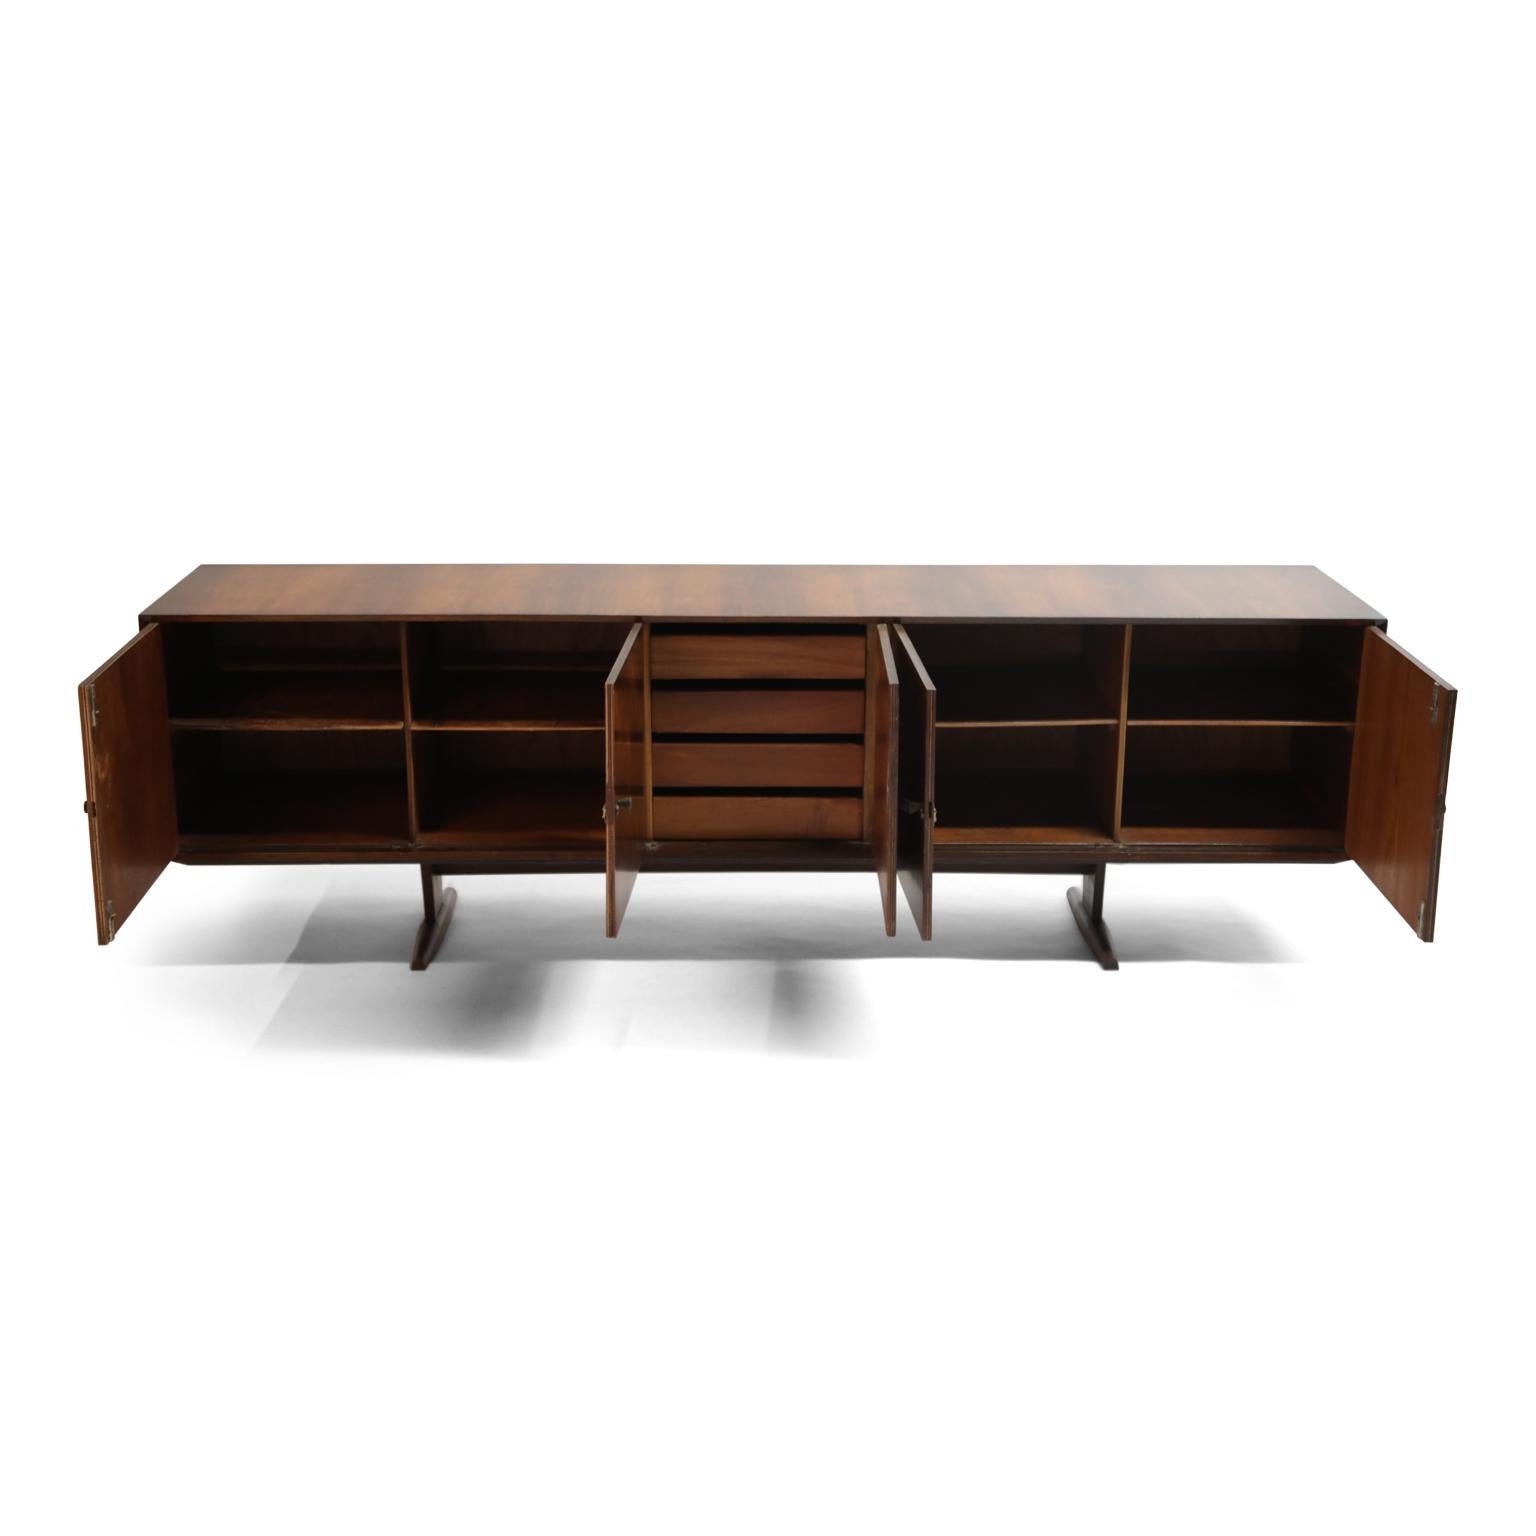 Brazilian Jacaranda Rosewood Parquetry Sideboard by Giuseppe Scapinelli, 1960s (Parkettarbeit)